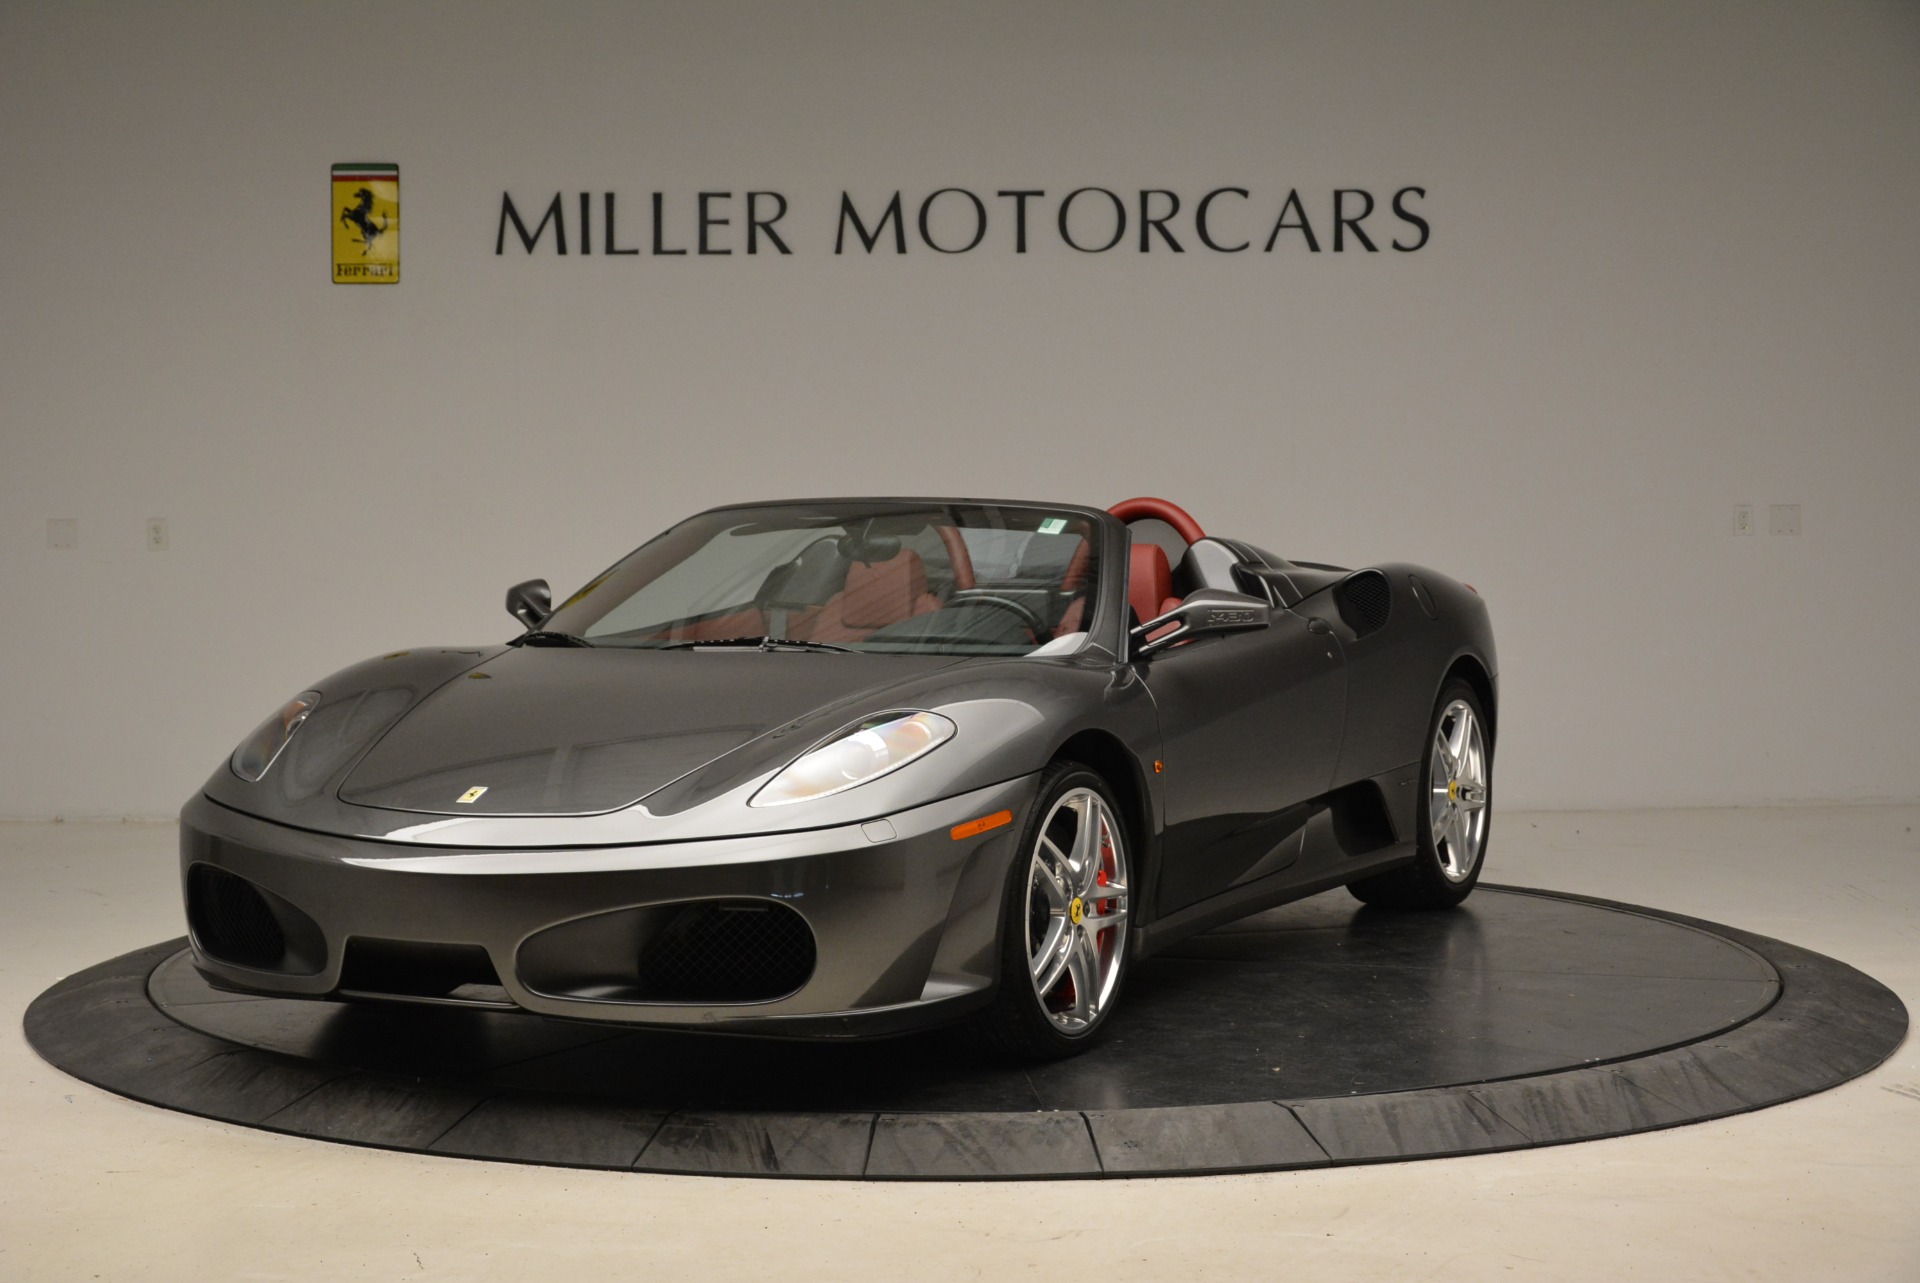 Used 2008 Ferrari F430 Spider for sale Sold at Rolls-Royce Motor Cars Greenwich in Greenwich CT 06830 1